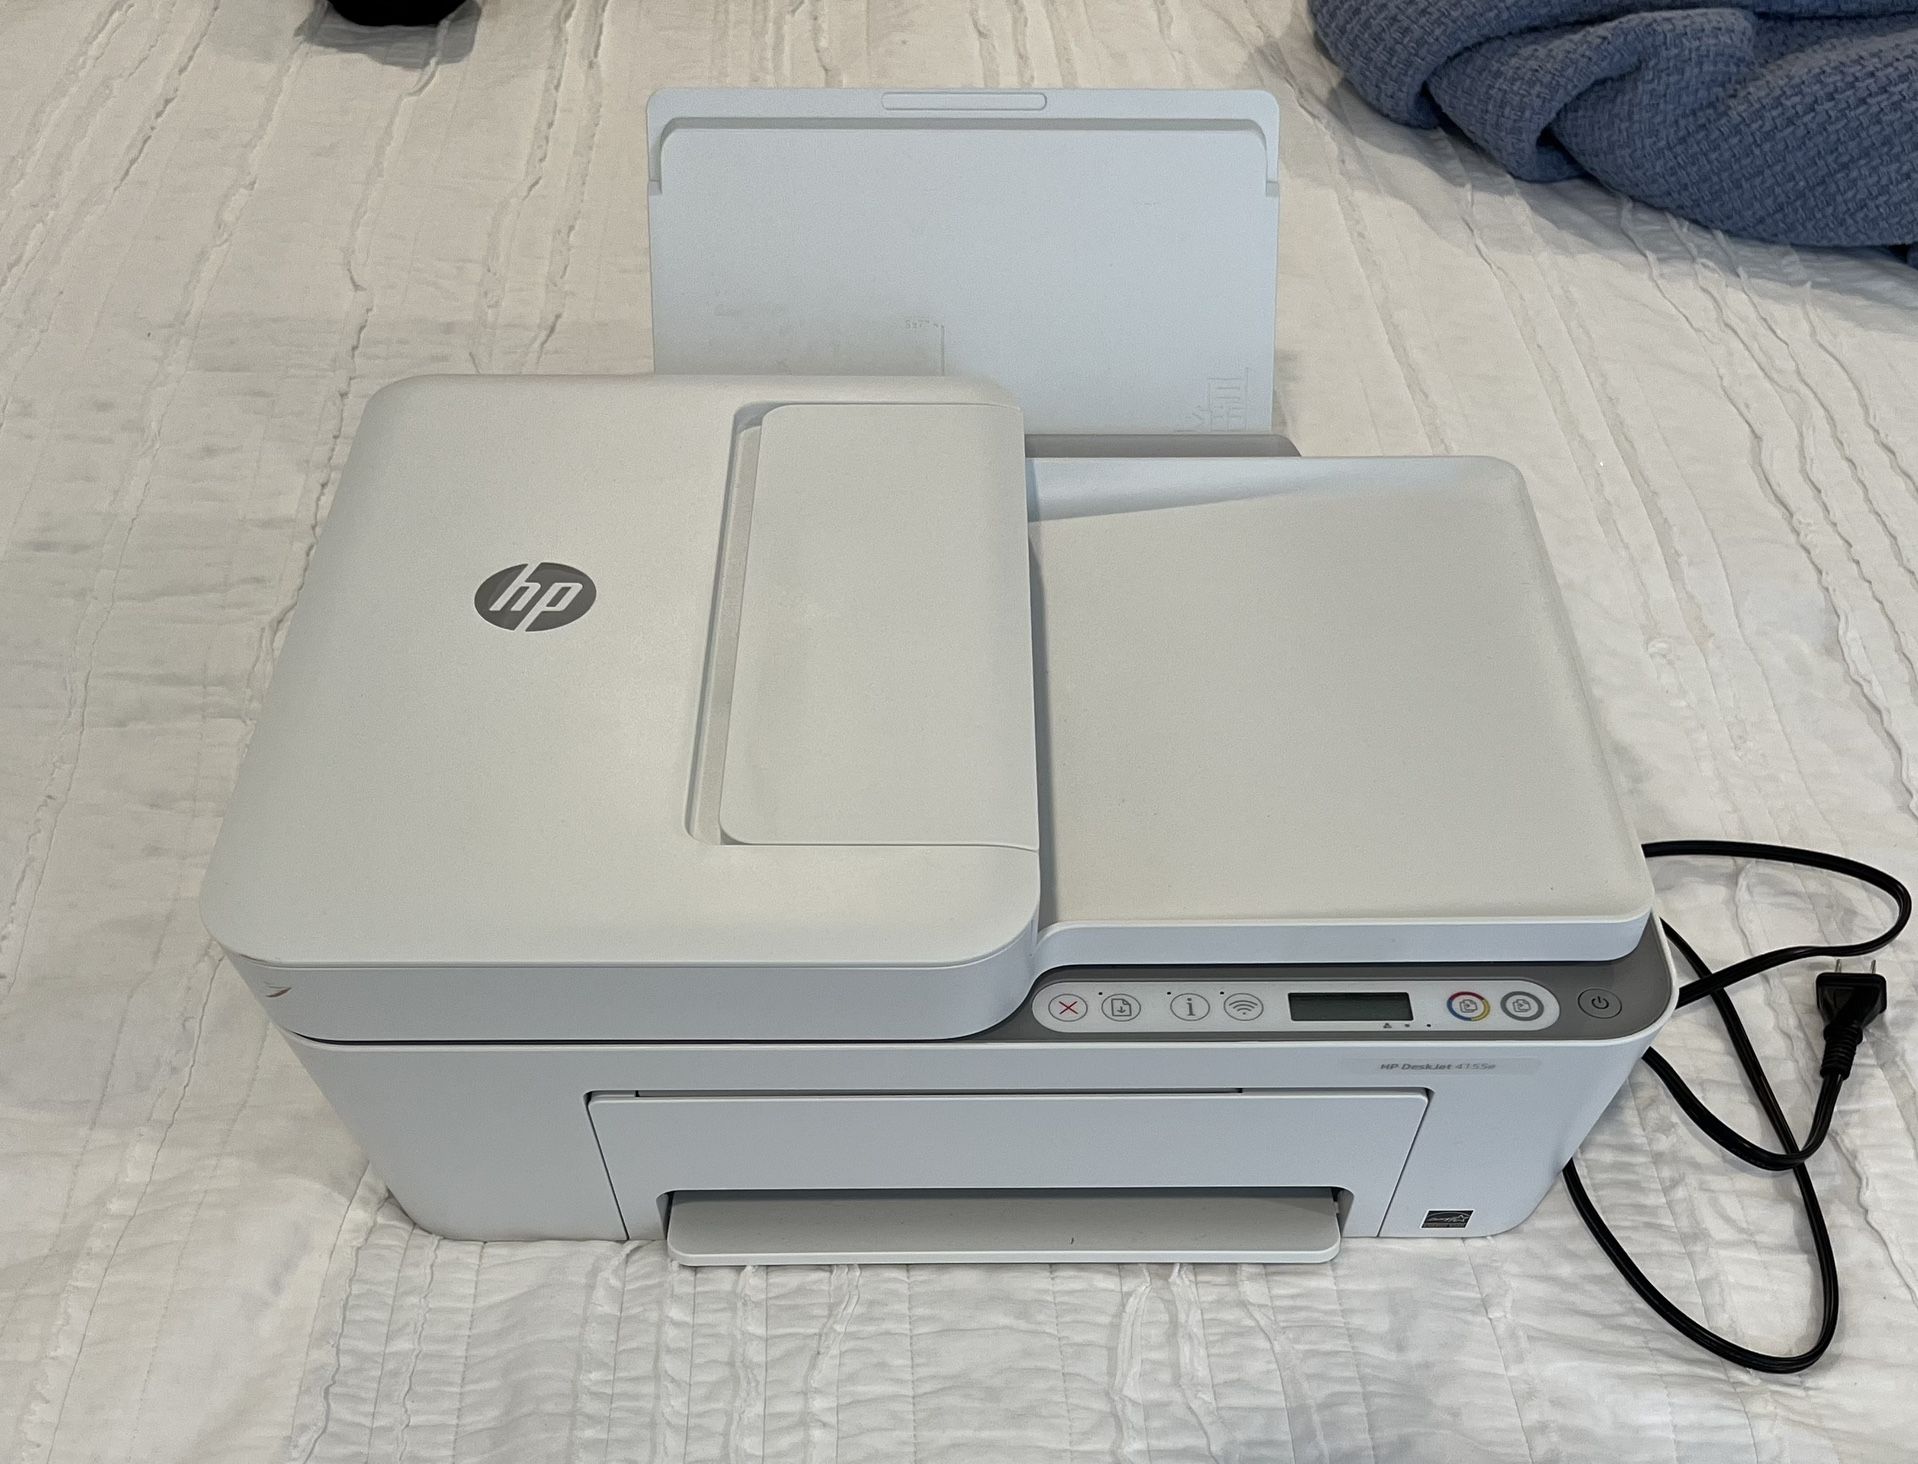 HP Deskjet 4100e - All-in-one Printer With WiFi Direct